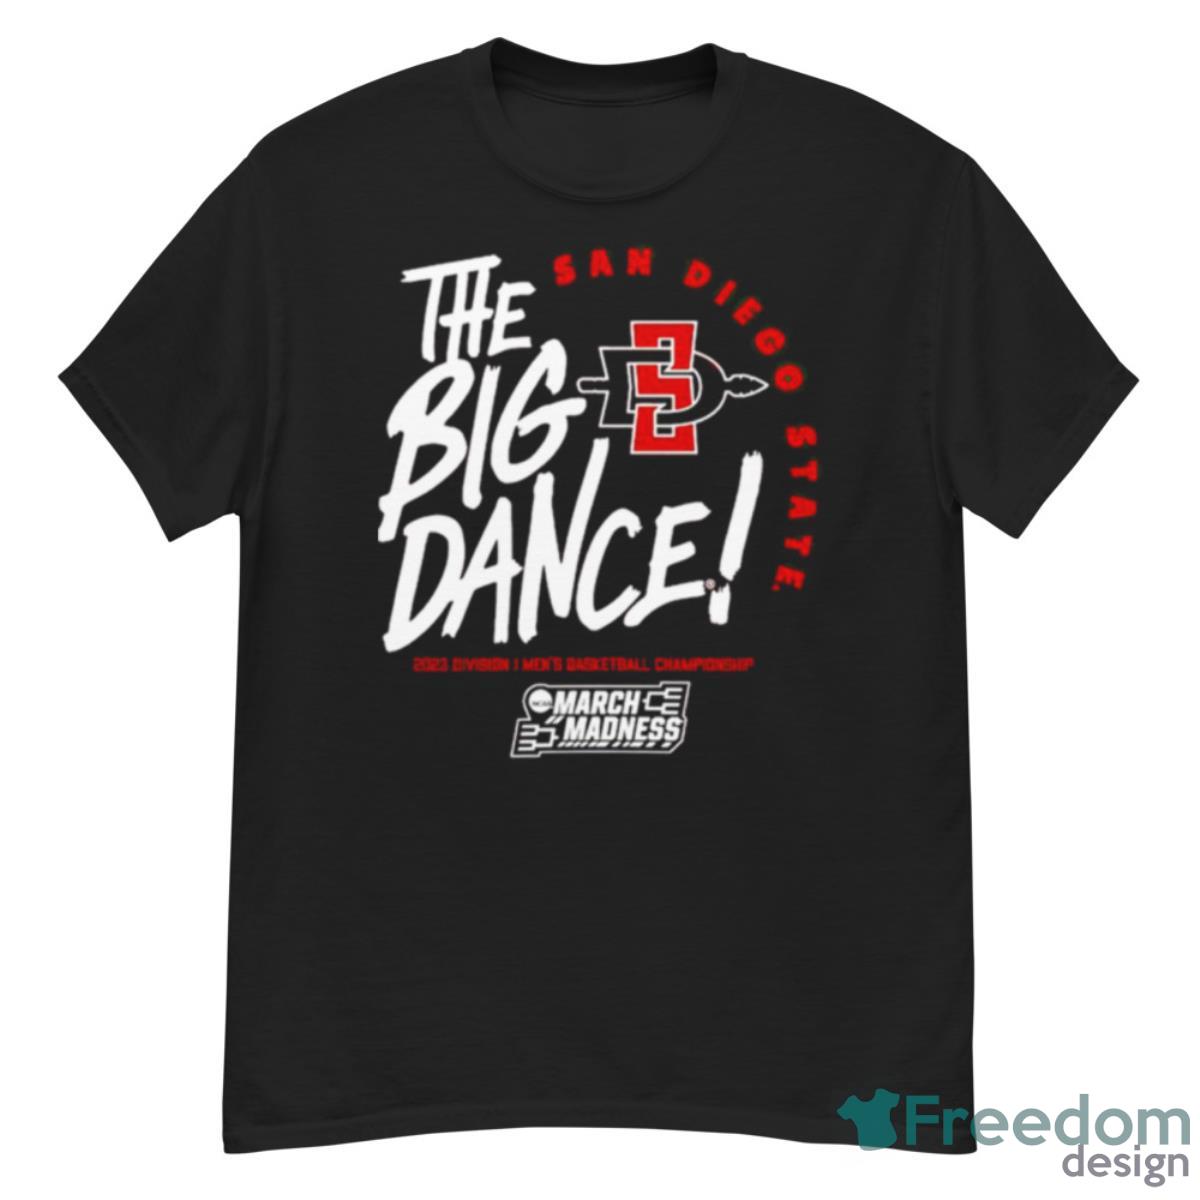 San Diego State The Big Dance March Madness 2023 Division Men’s Basketball Championship Shirt - G500 Men’s Classic T-Shirt